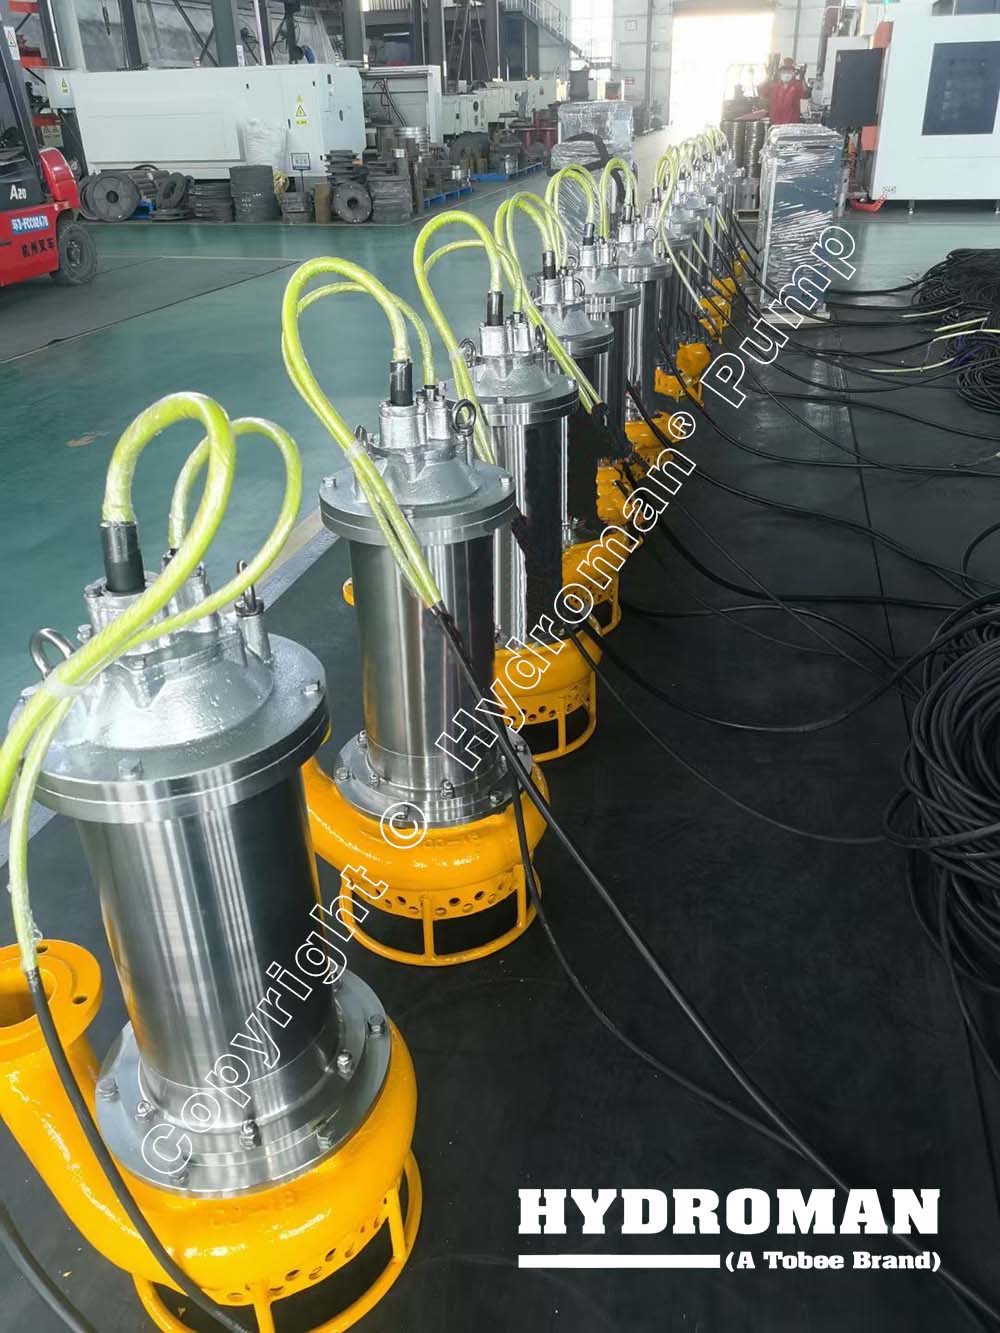 Electric Submersible Pumps